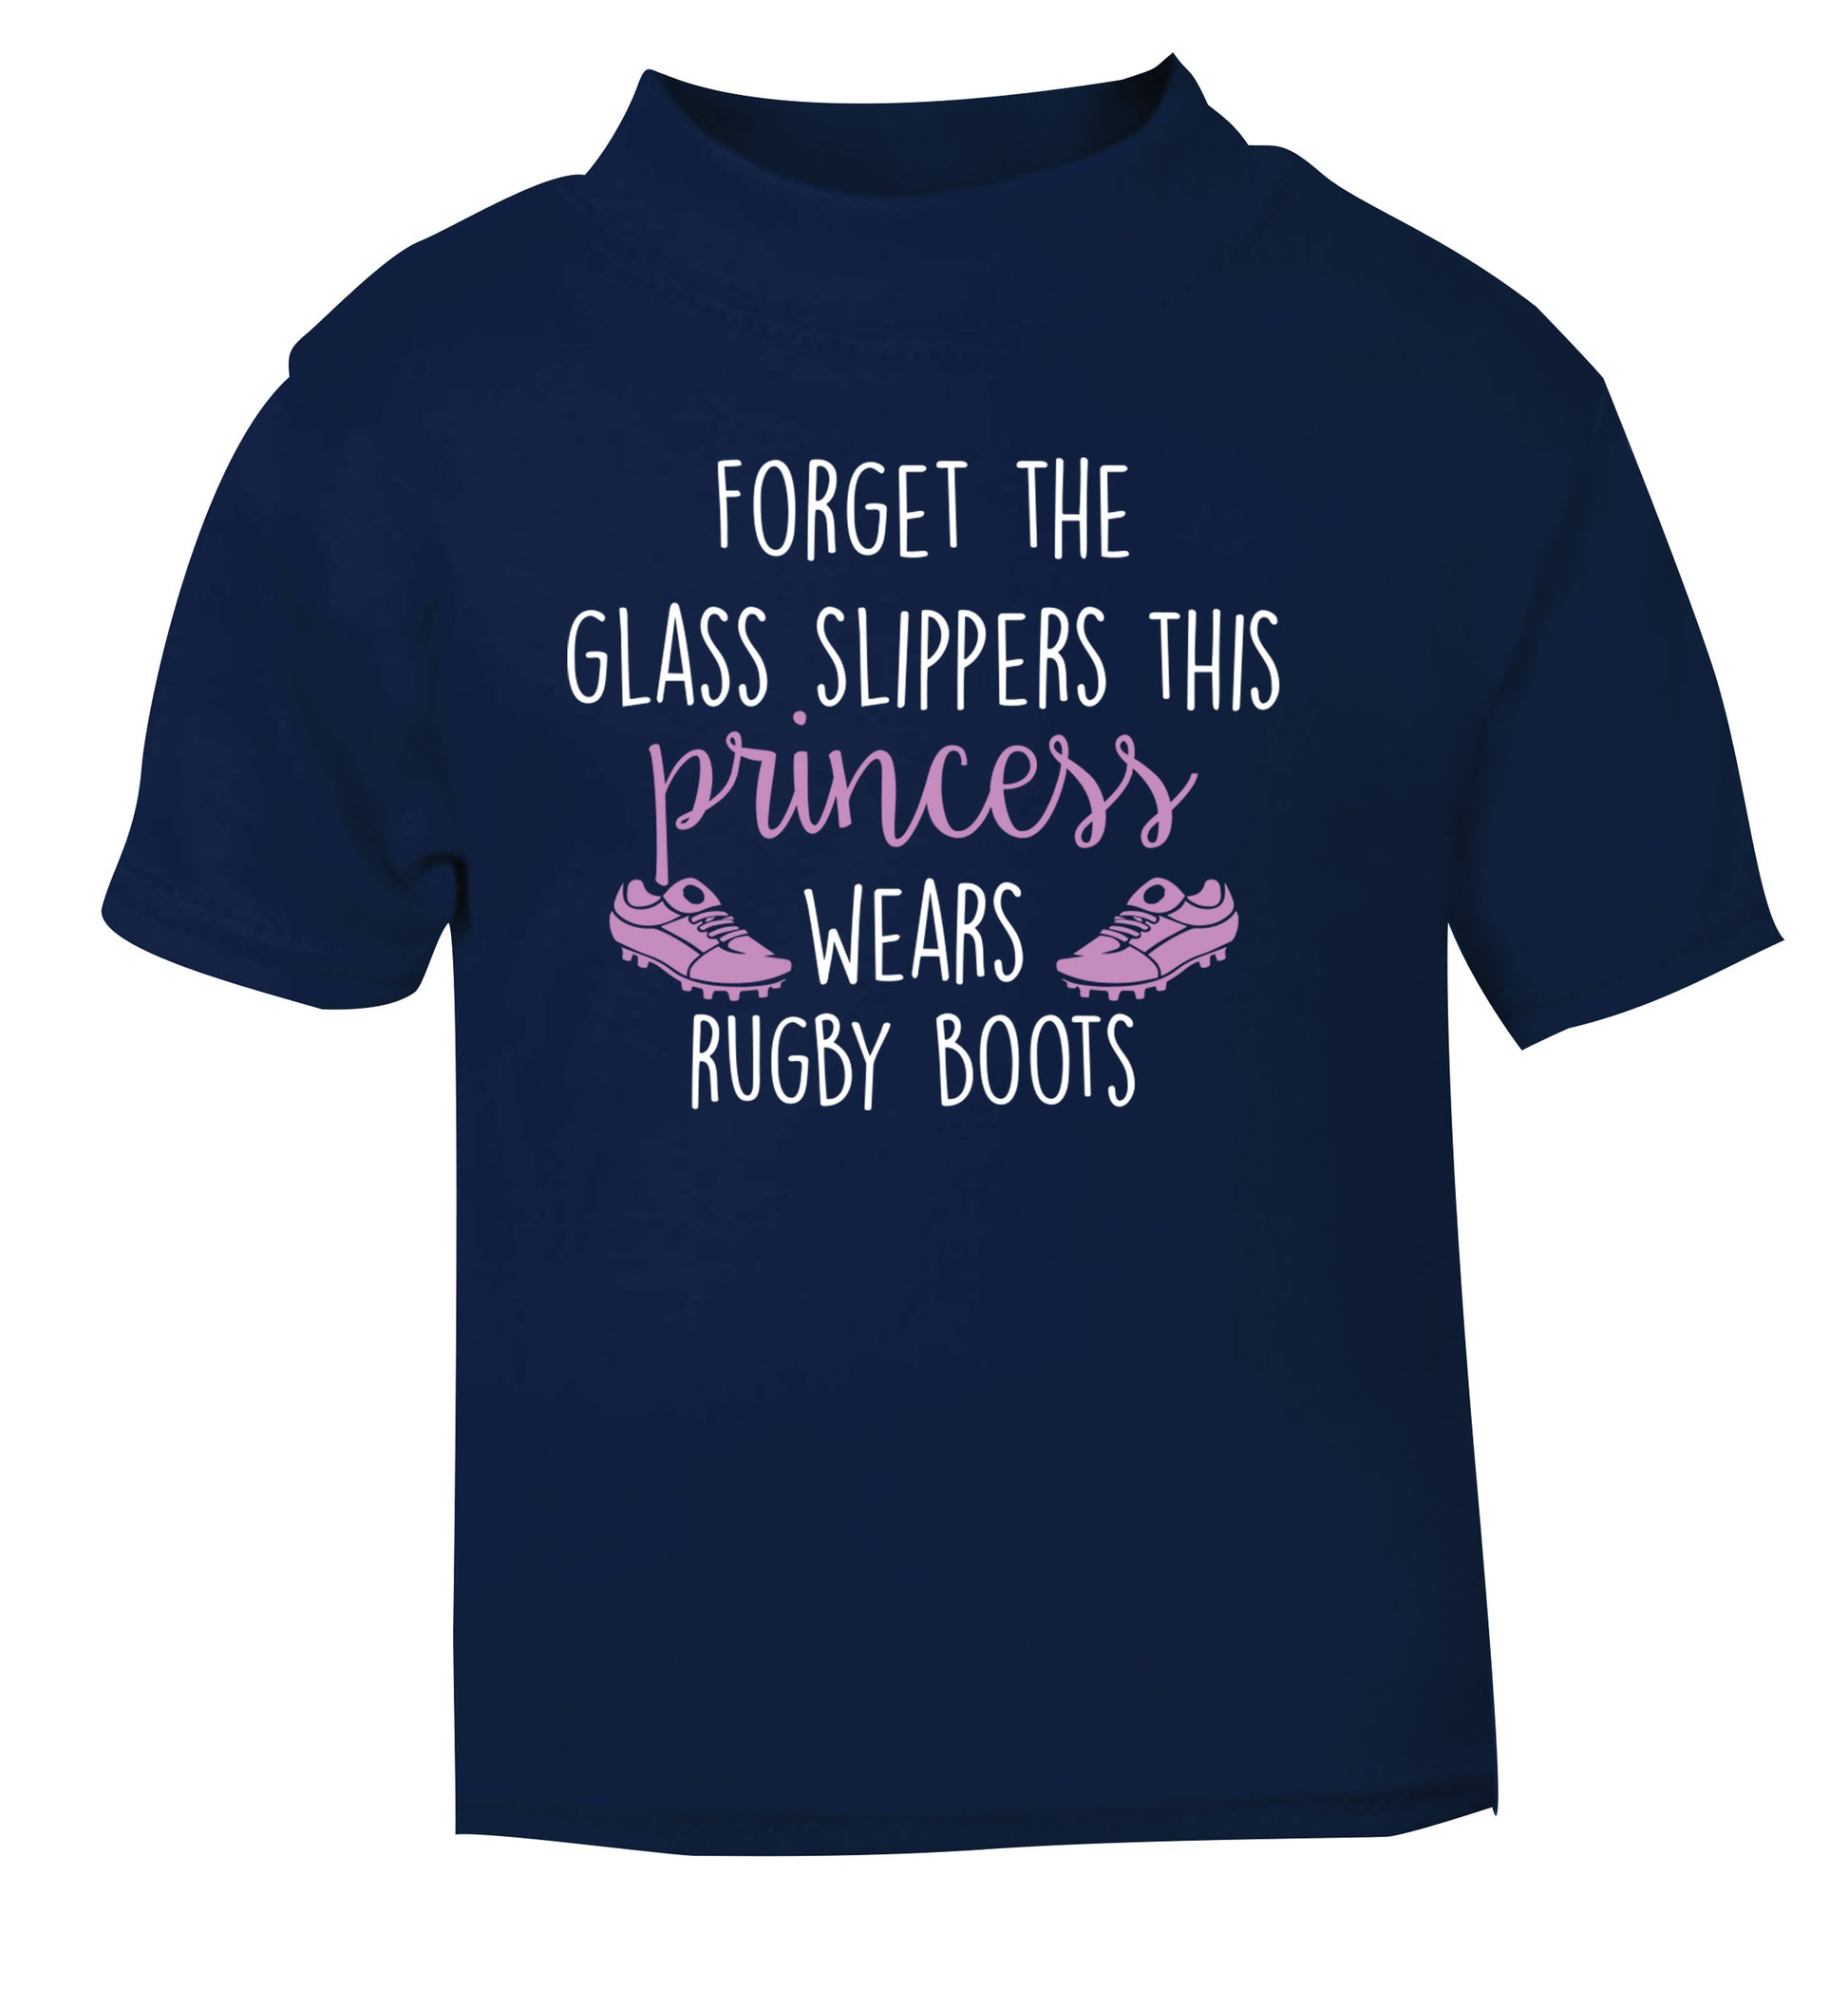 Forget the glass slippers this princess wears rugby boots navy Baby Toddler Tshirt 2 Years